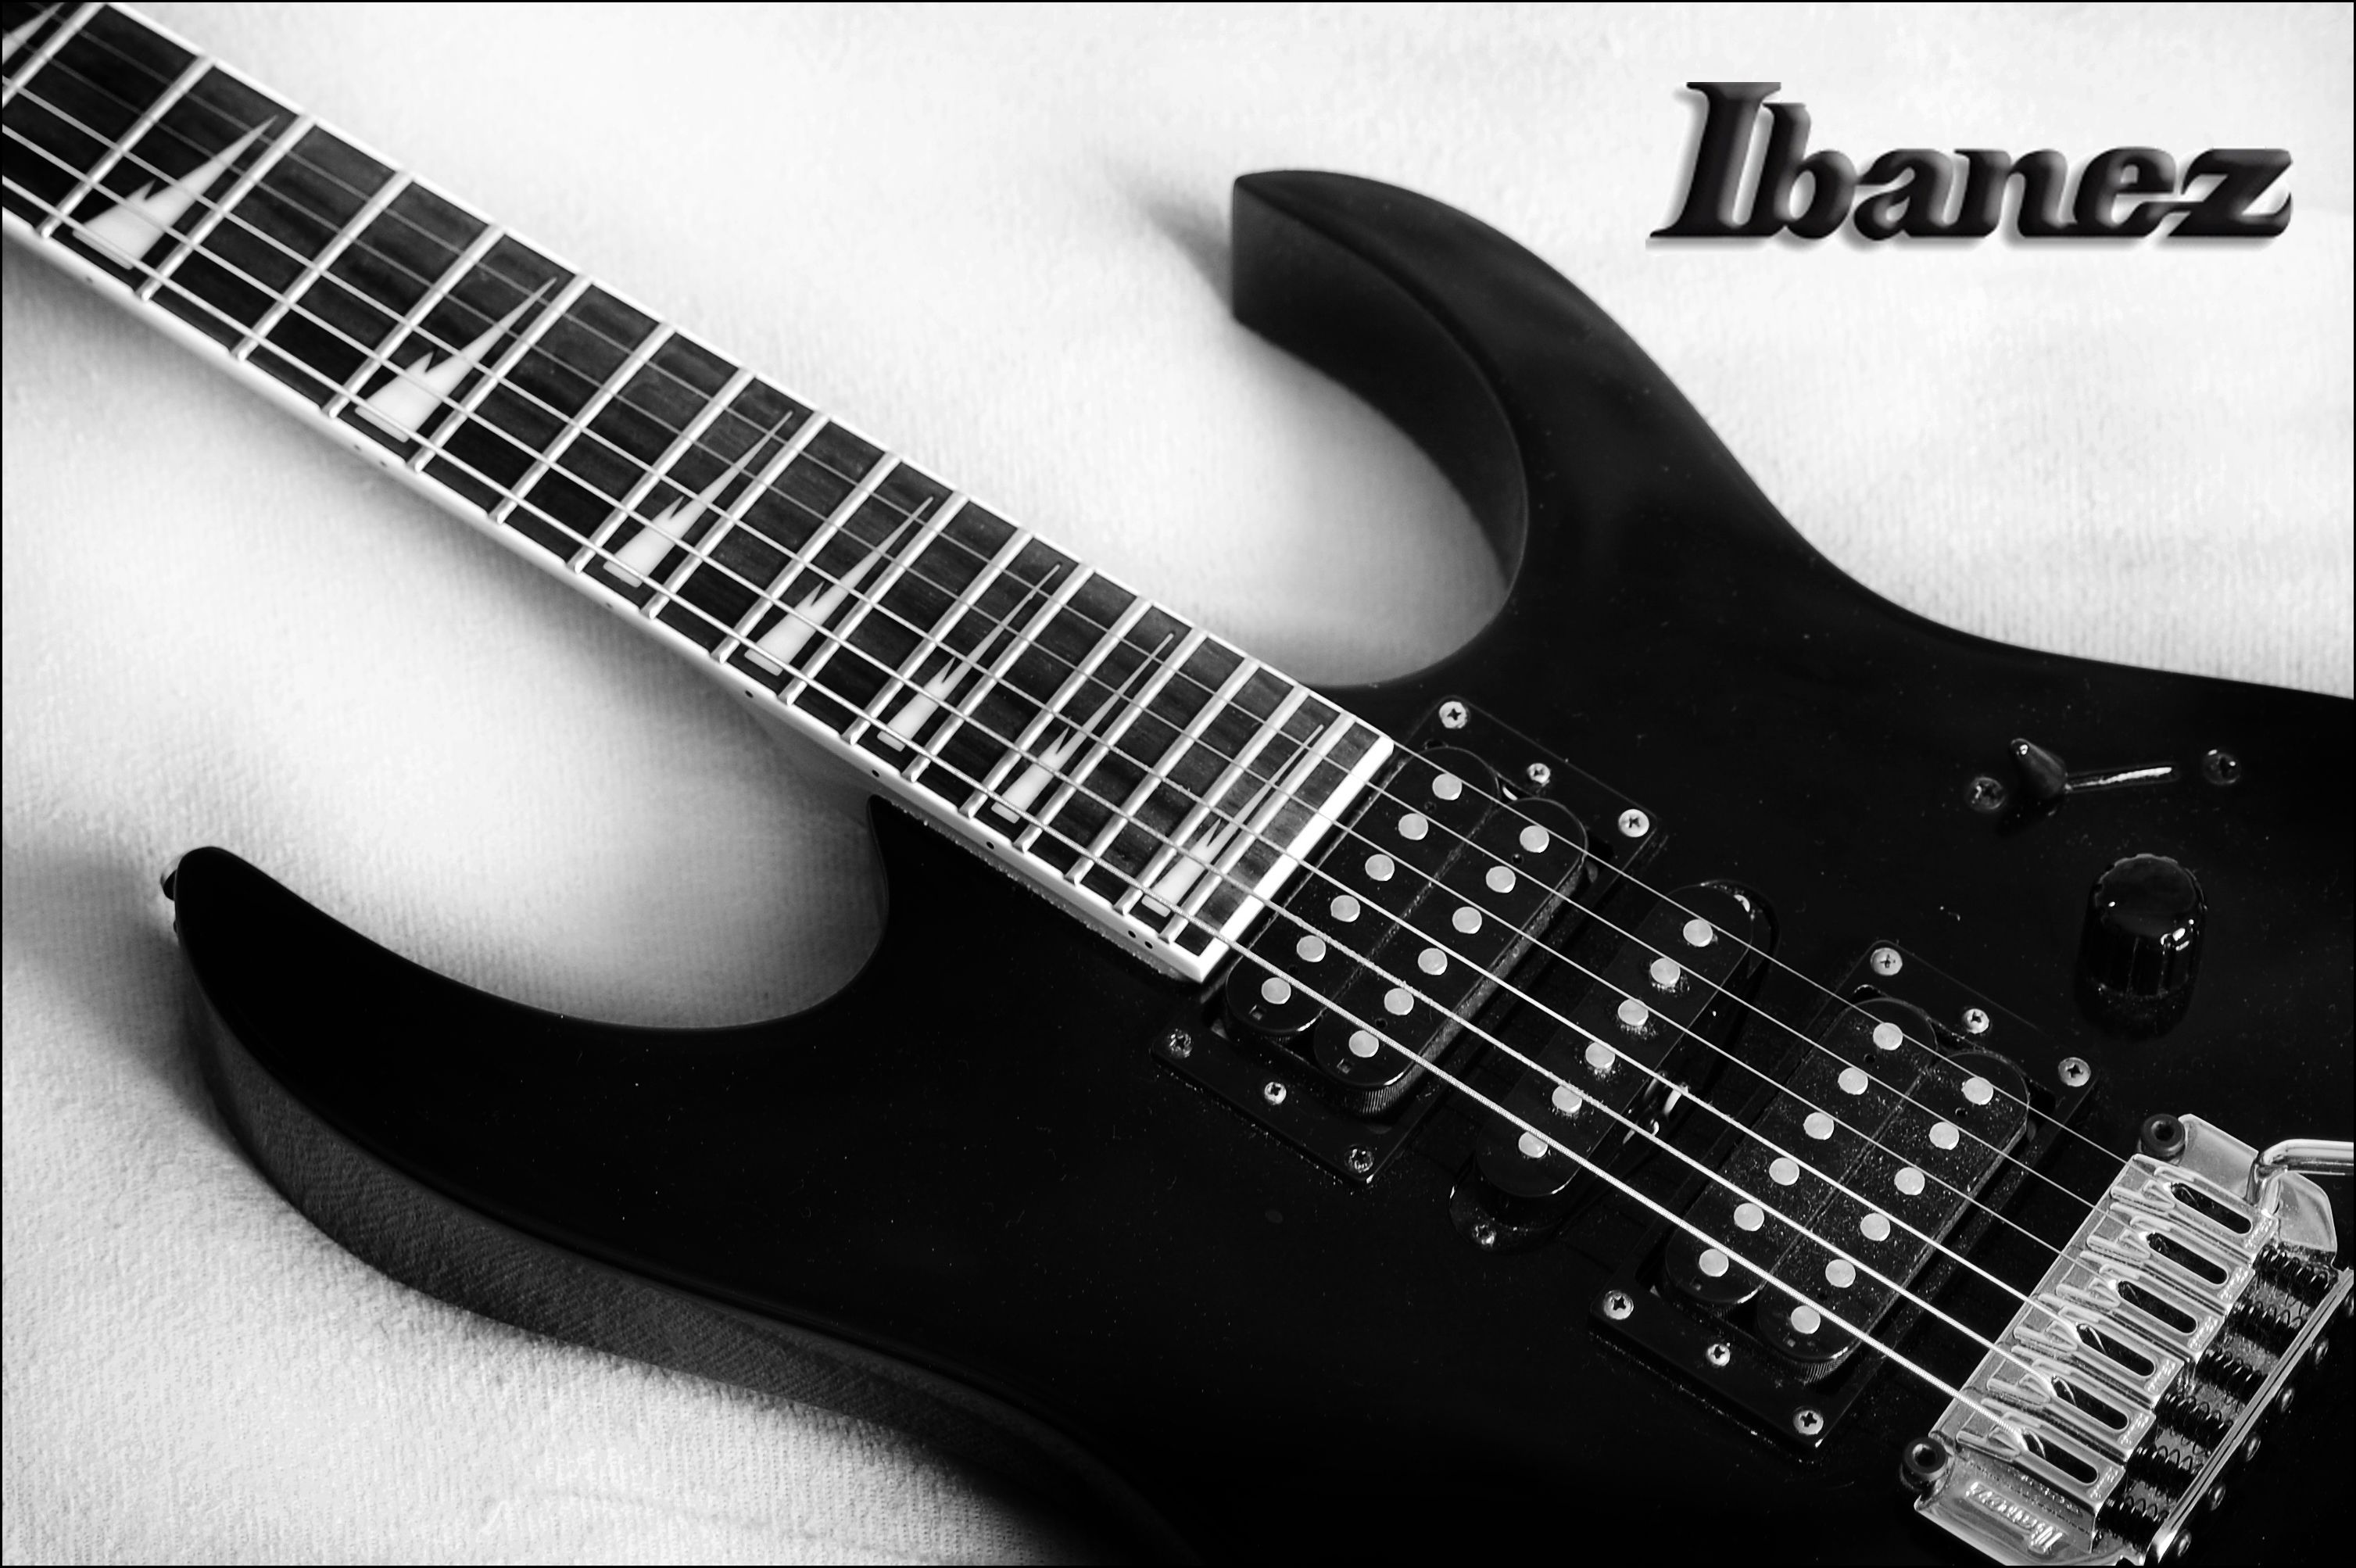 Ibanez Guitar Wallpapers For Desktop: Music by Free download best ...